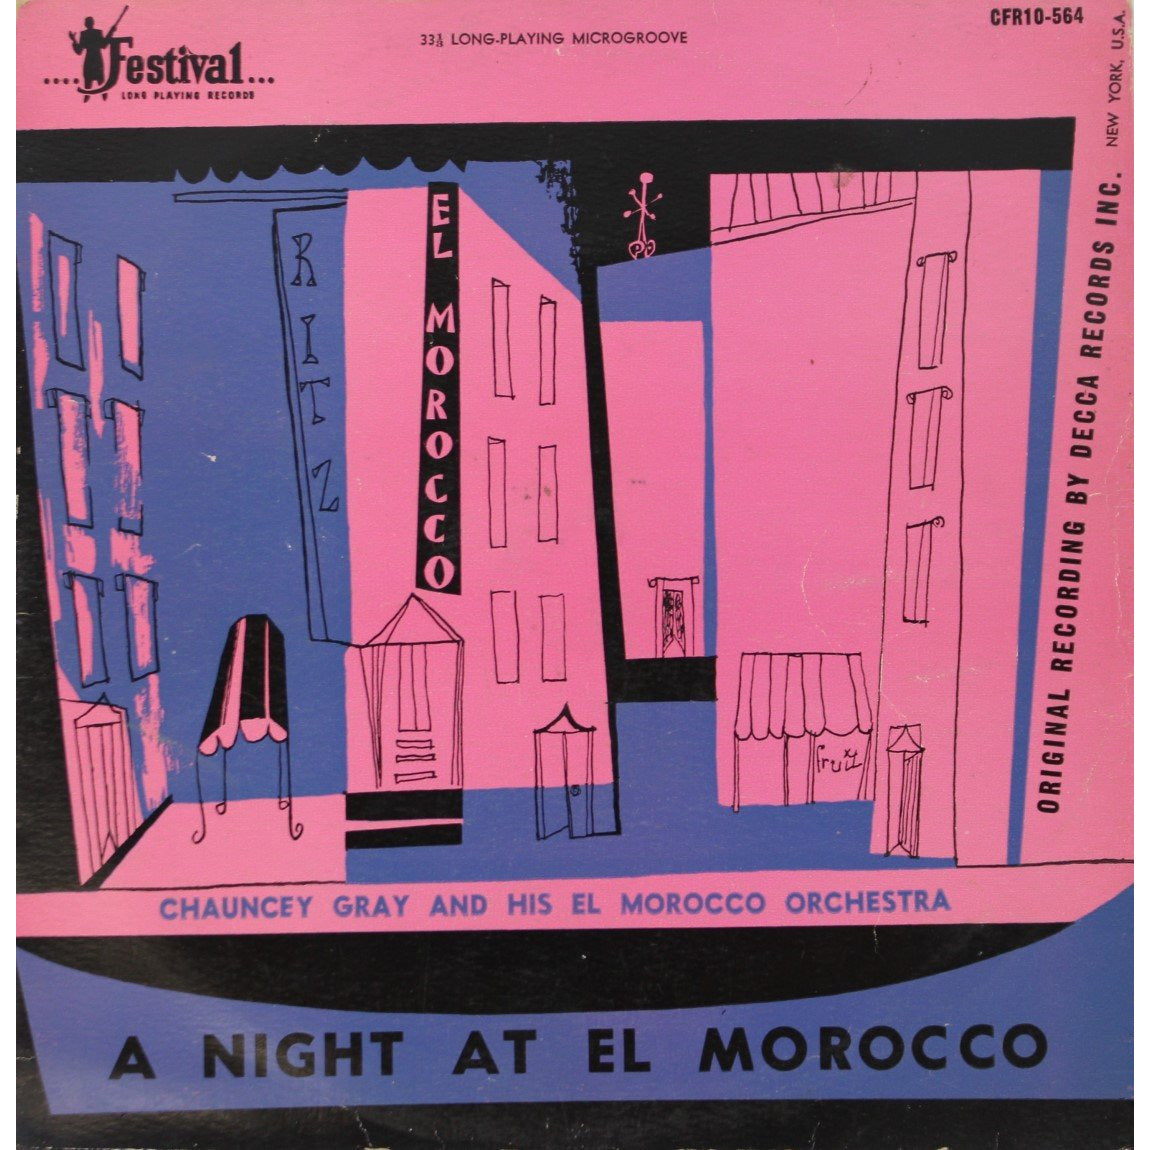 A Night at El Morocco LP w/ Chauncey Gray and His Orchestra